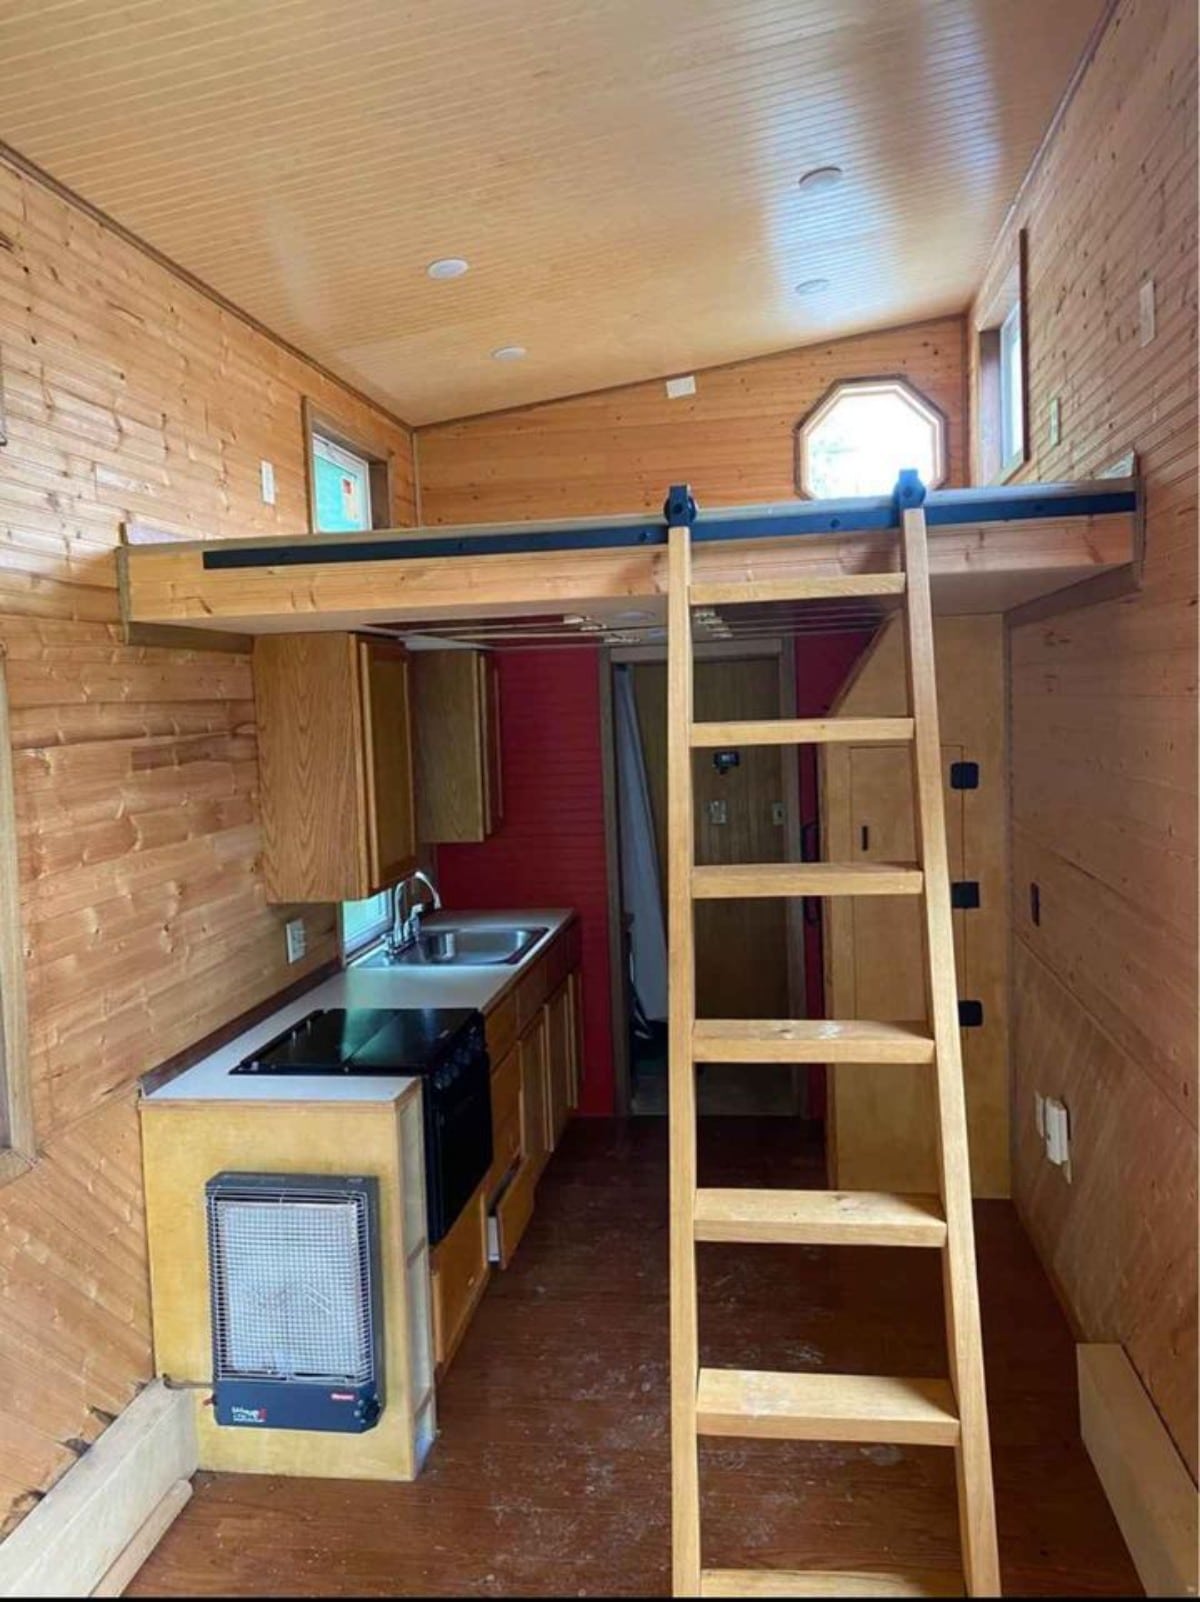 Interior view of 24' Off-Grid Tiny House